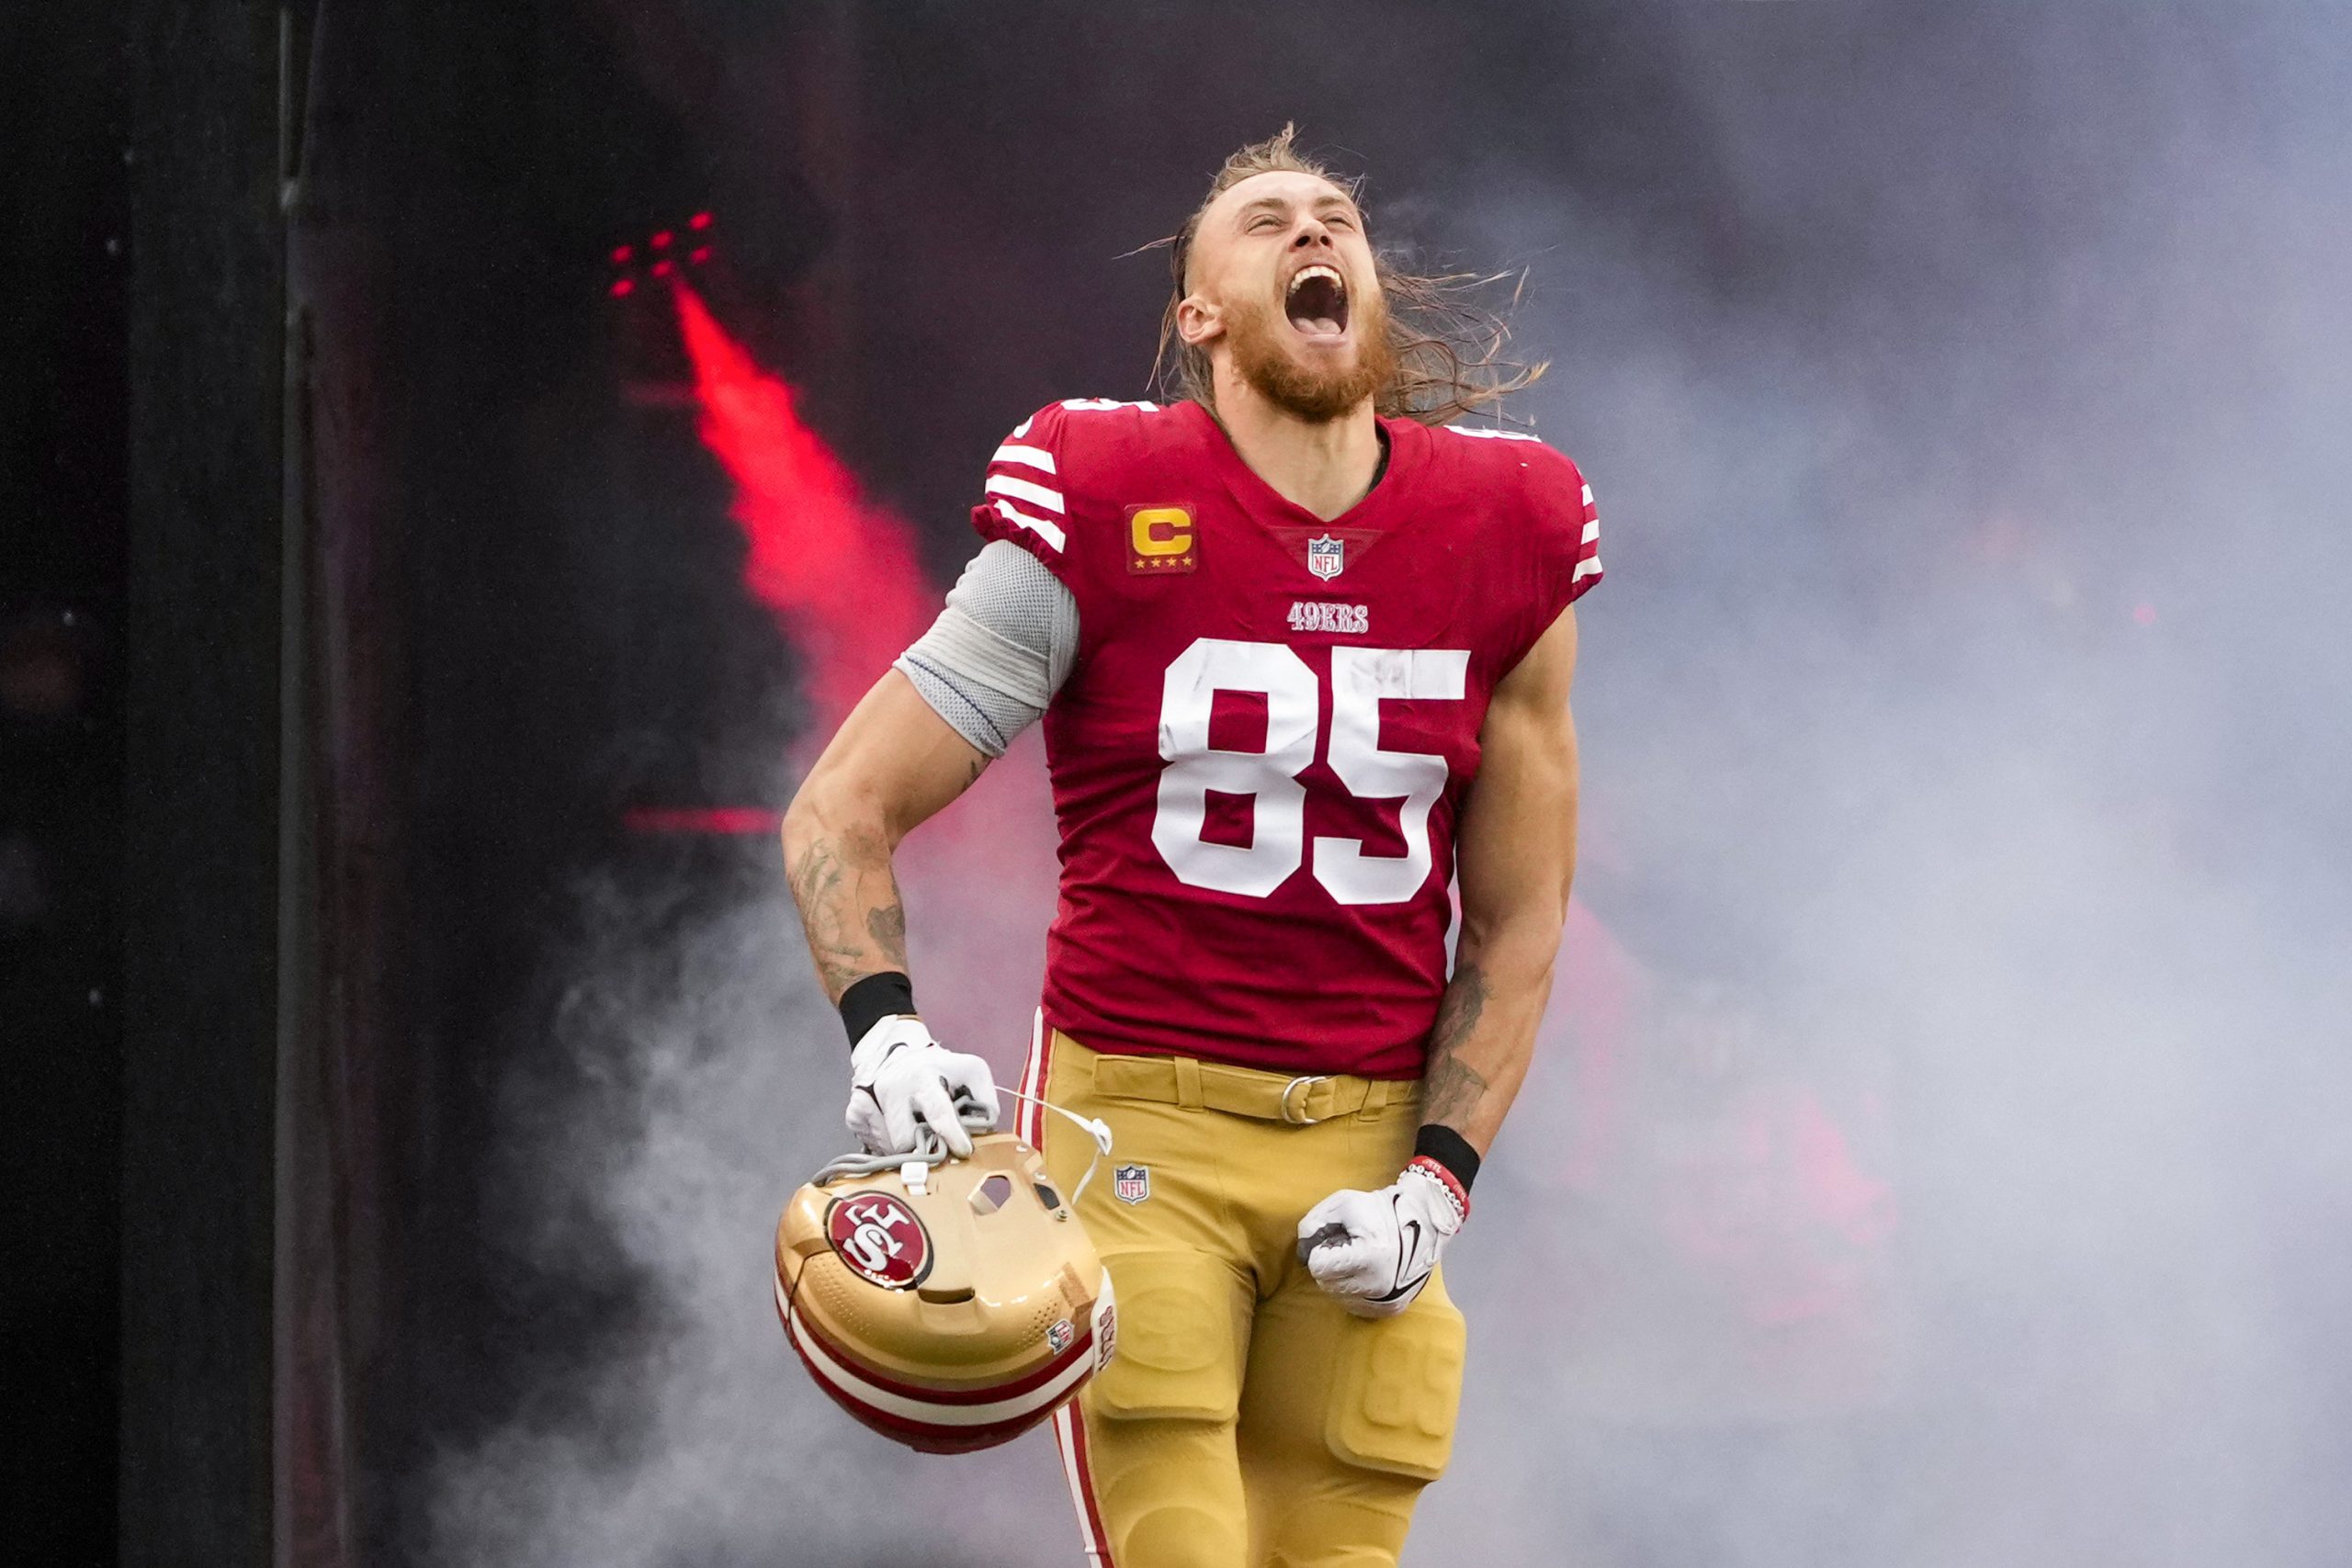 George Kittle & 49ers' offense derives from 'hunger' to make